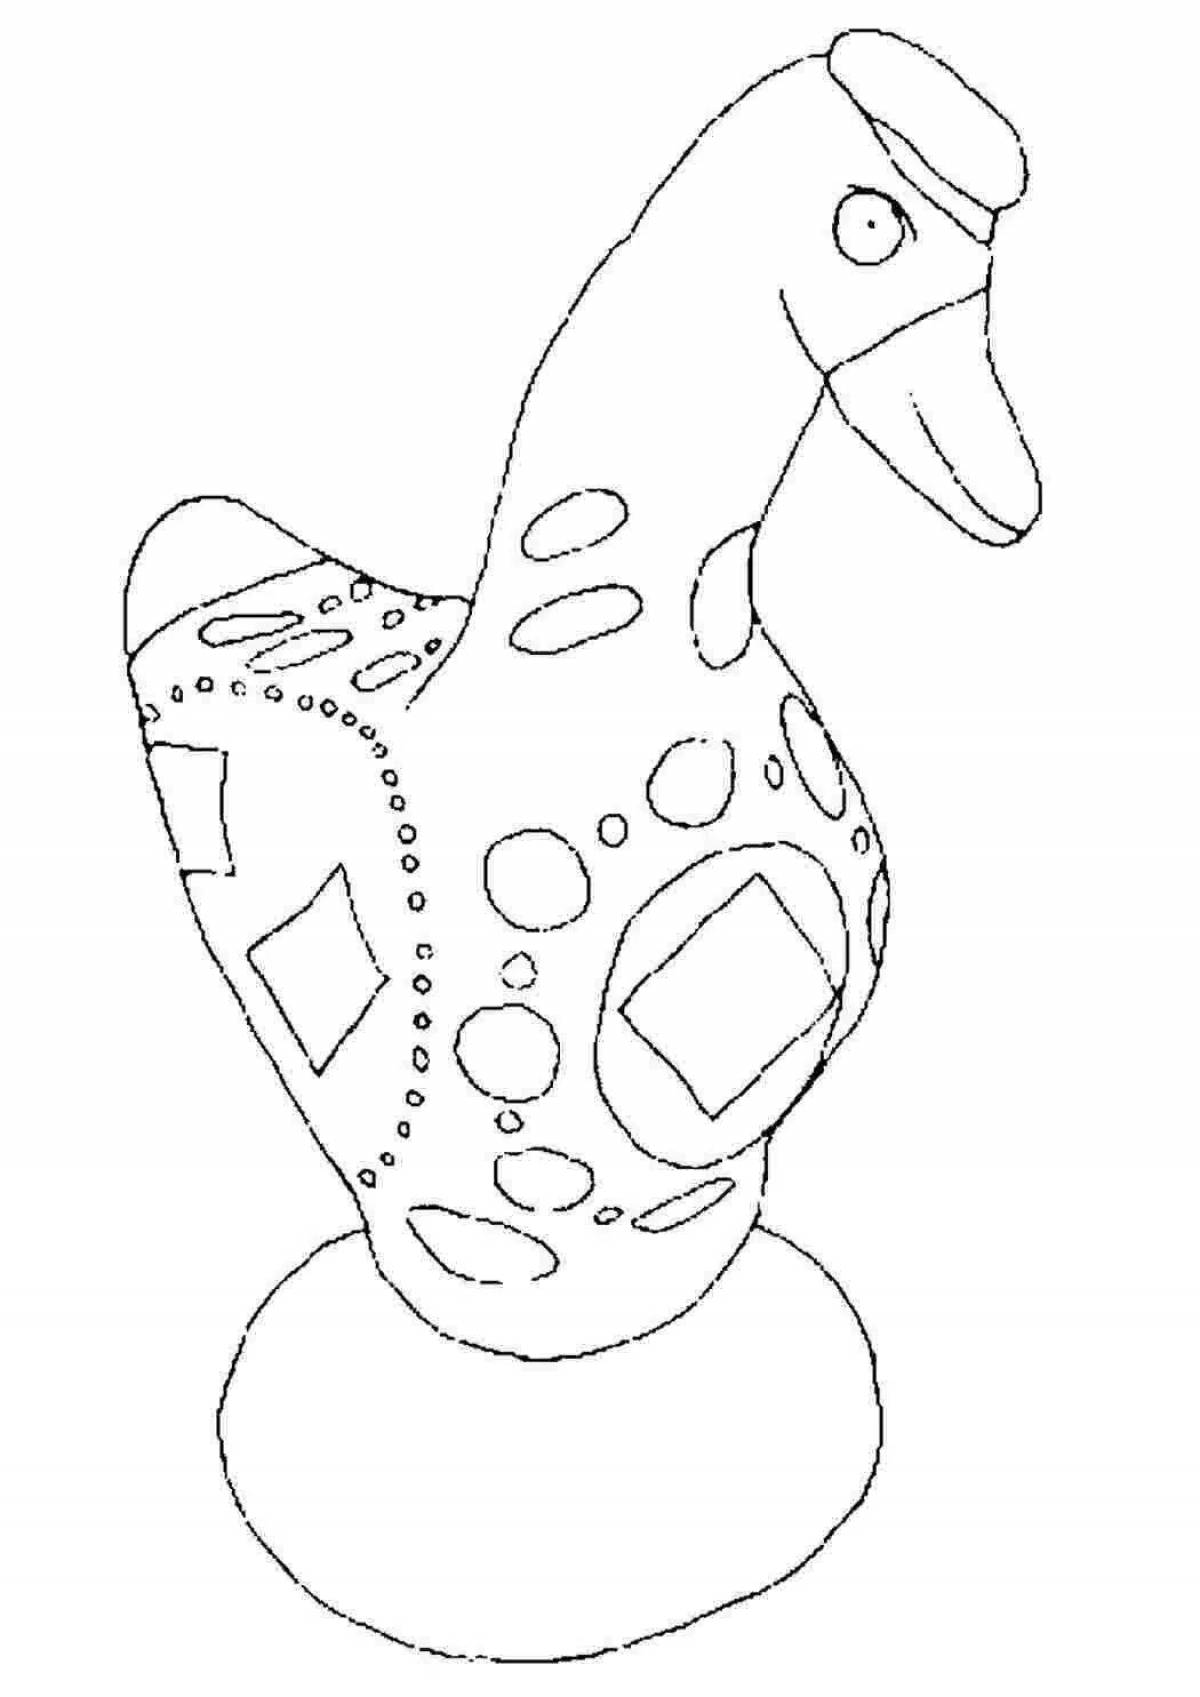 Coloring page cute belarusian folk toy